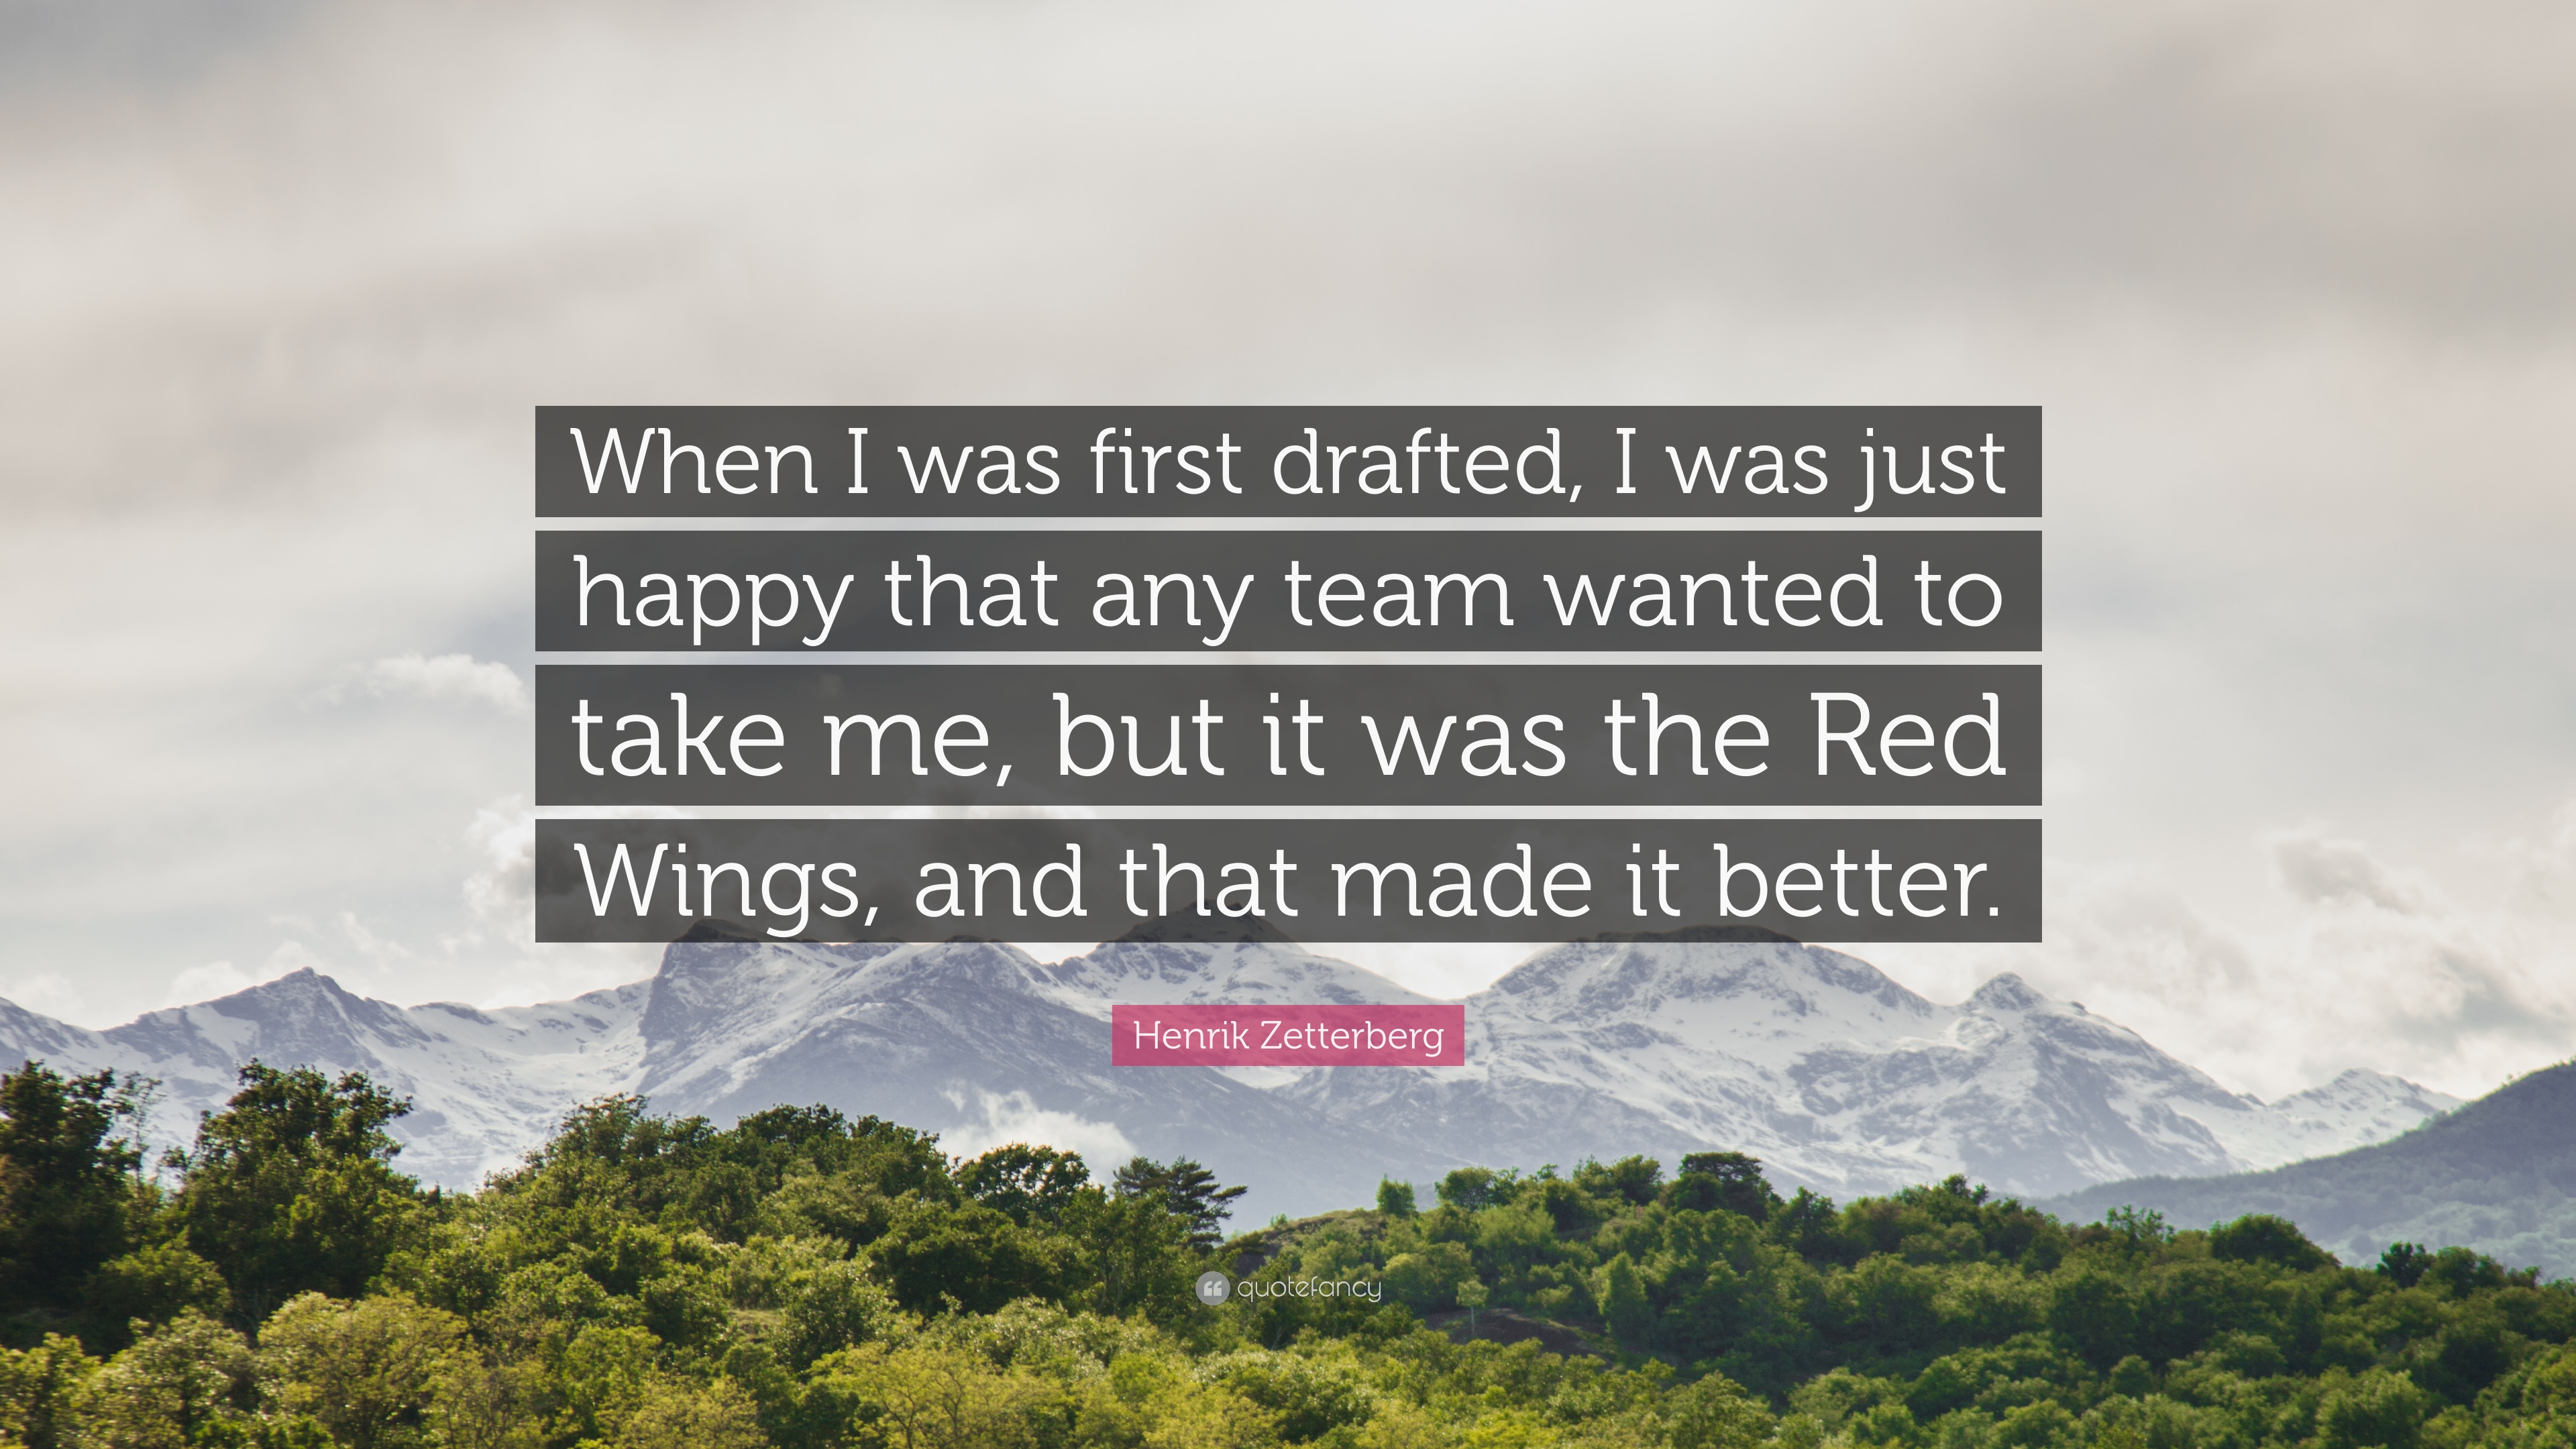 Henrik Zetterberg Quote: “When I was first drafted, I was just happy